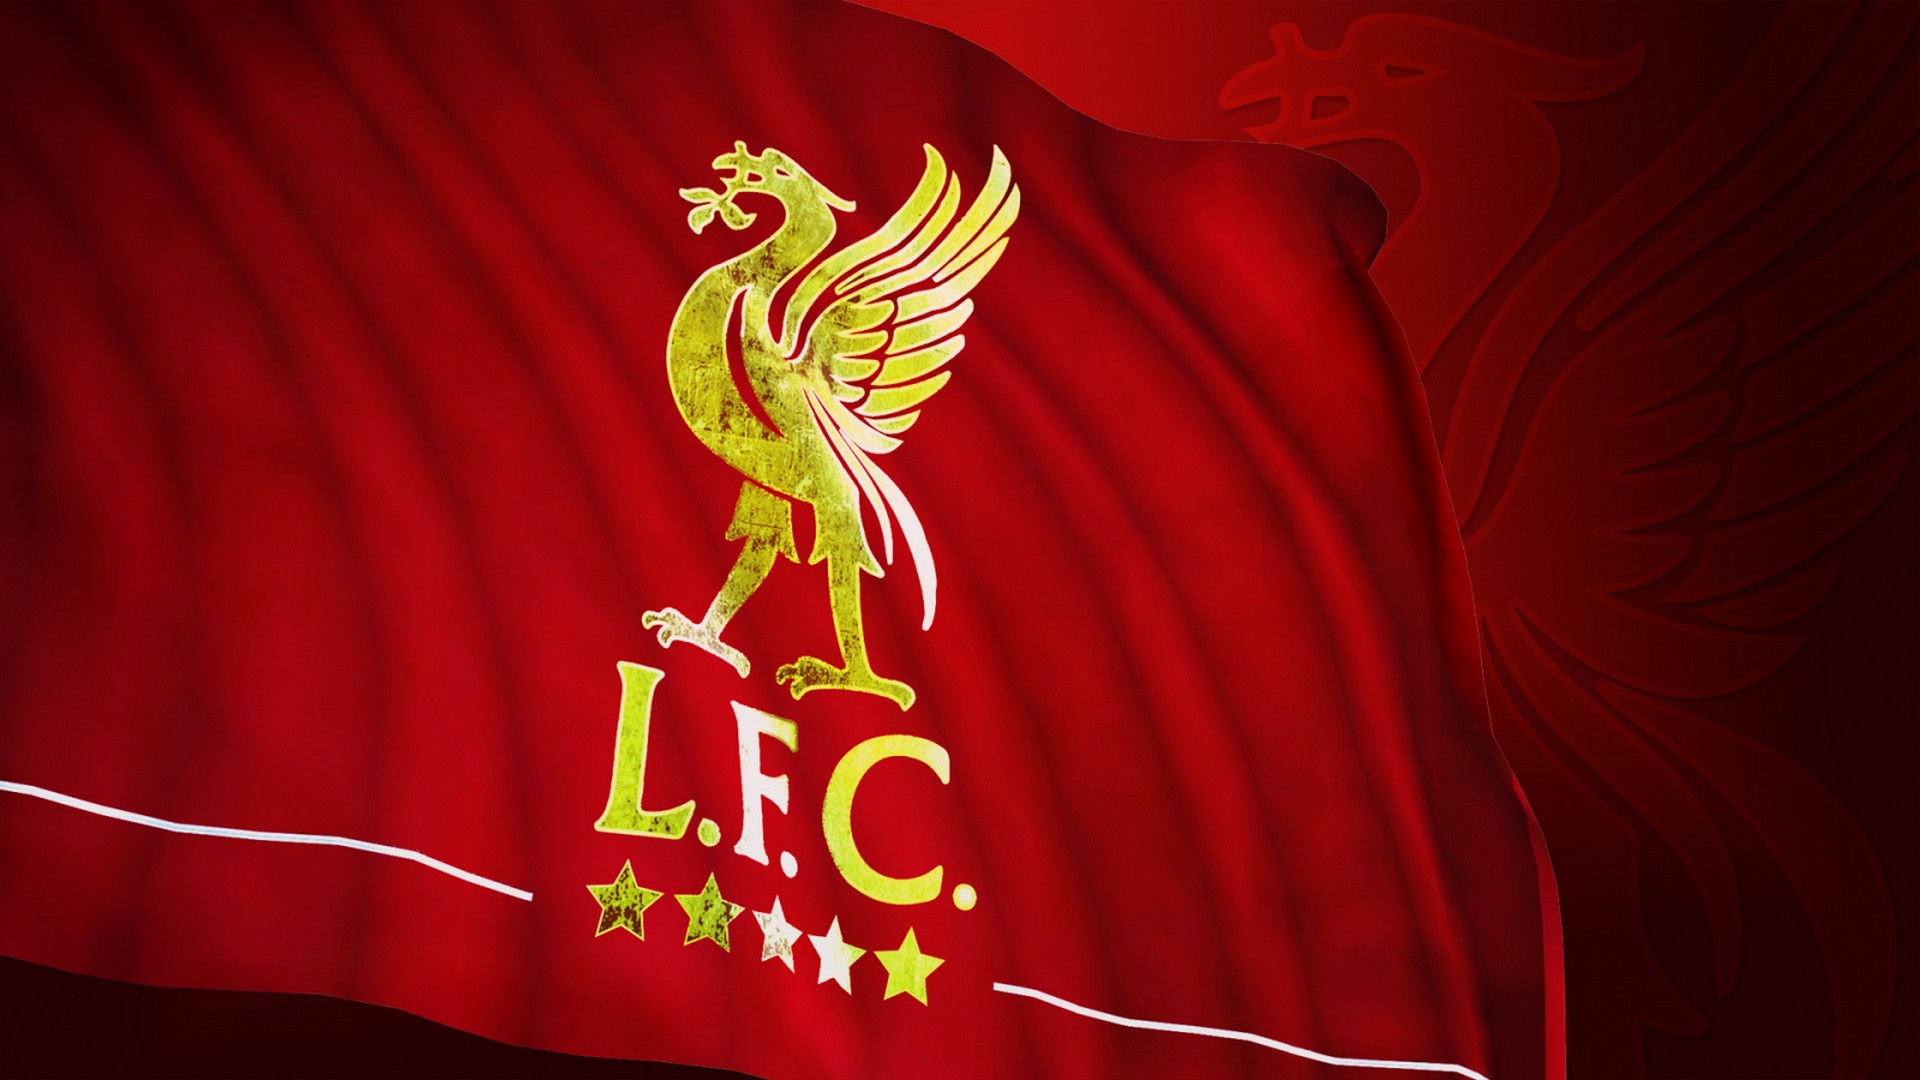 Liverpool Desktop Wallpaper with resolution 1920x1080 pixel. You can make this wallpaper for your Mac or Windows Desktop Background, iPhone, Android or Tablet and another Smartphone device